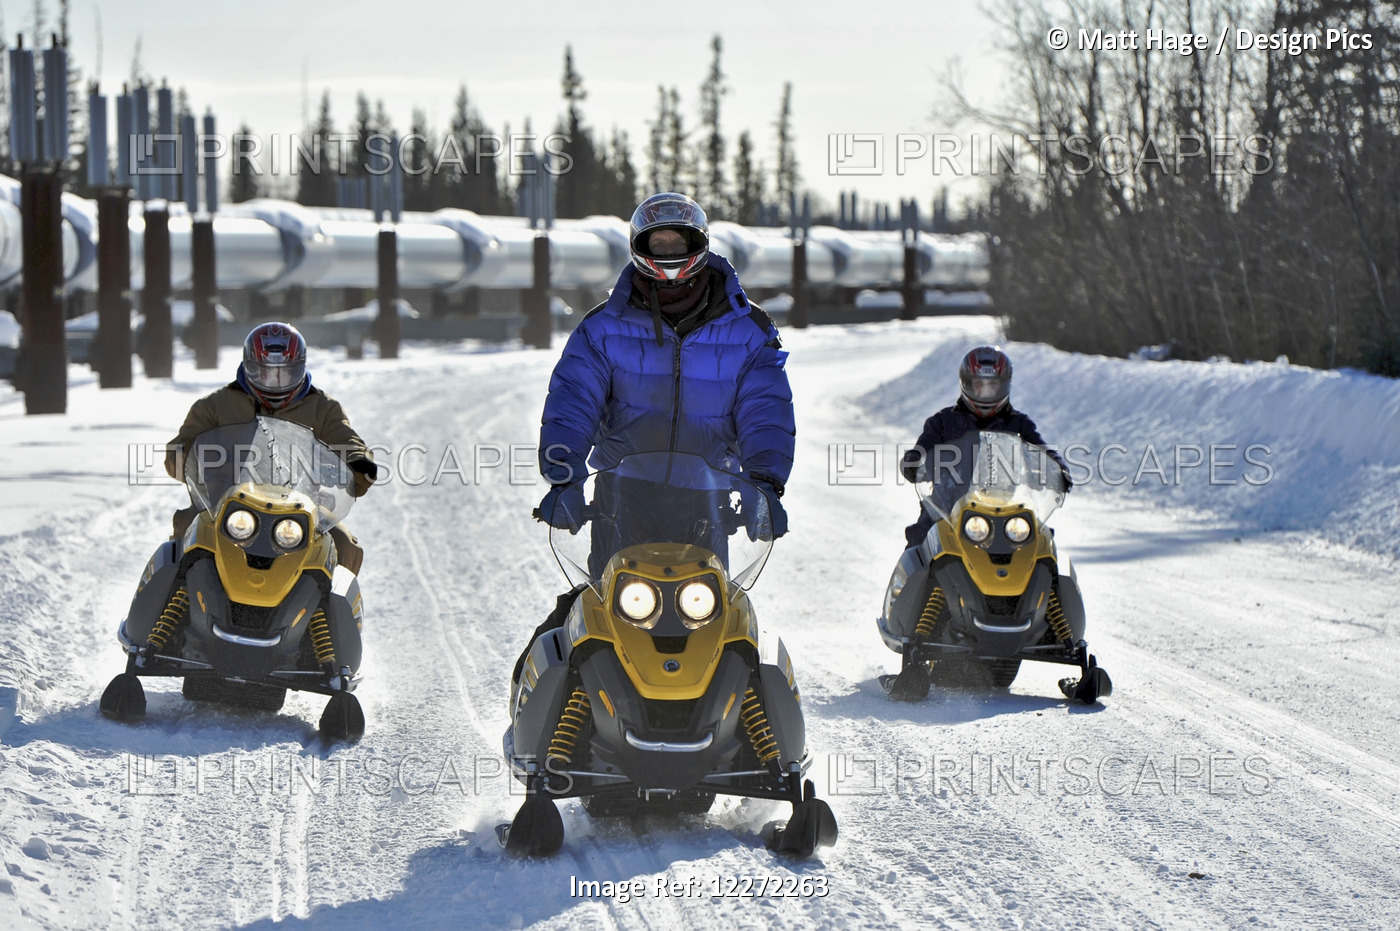 Iron Dog Adventure Guide Leads A Snowmachine Tour Along A Section Of The ...